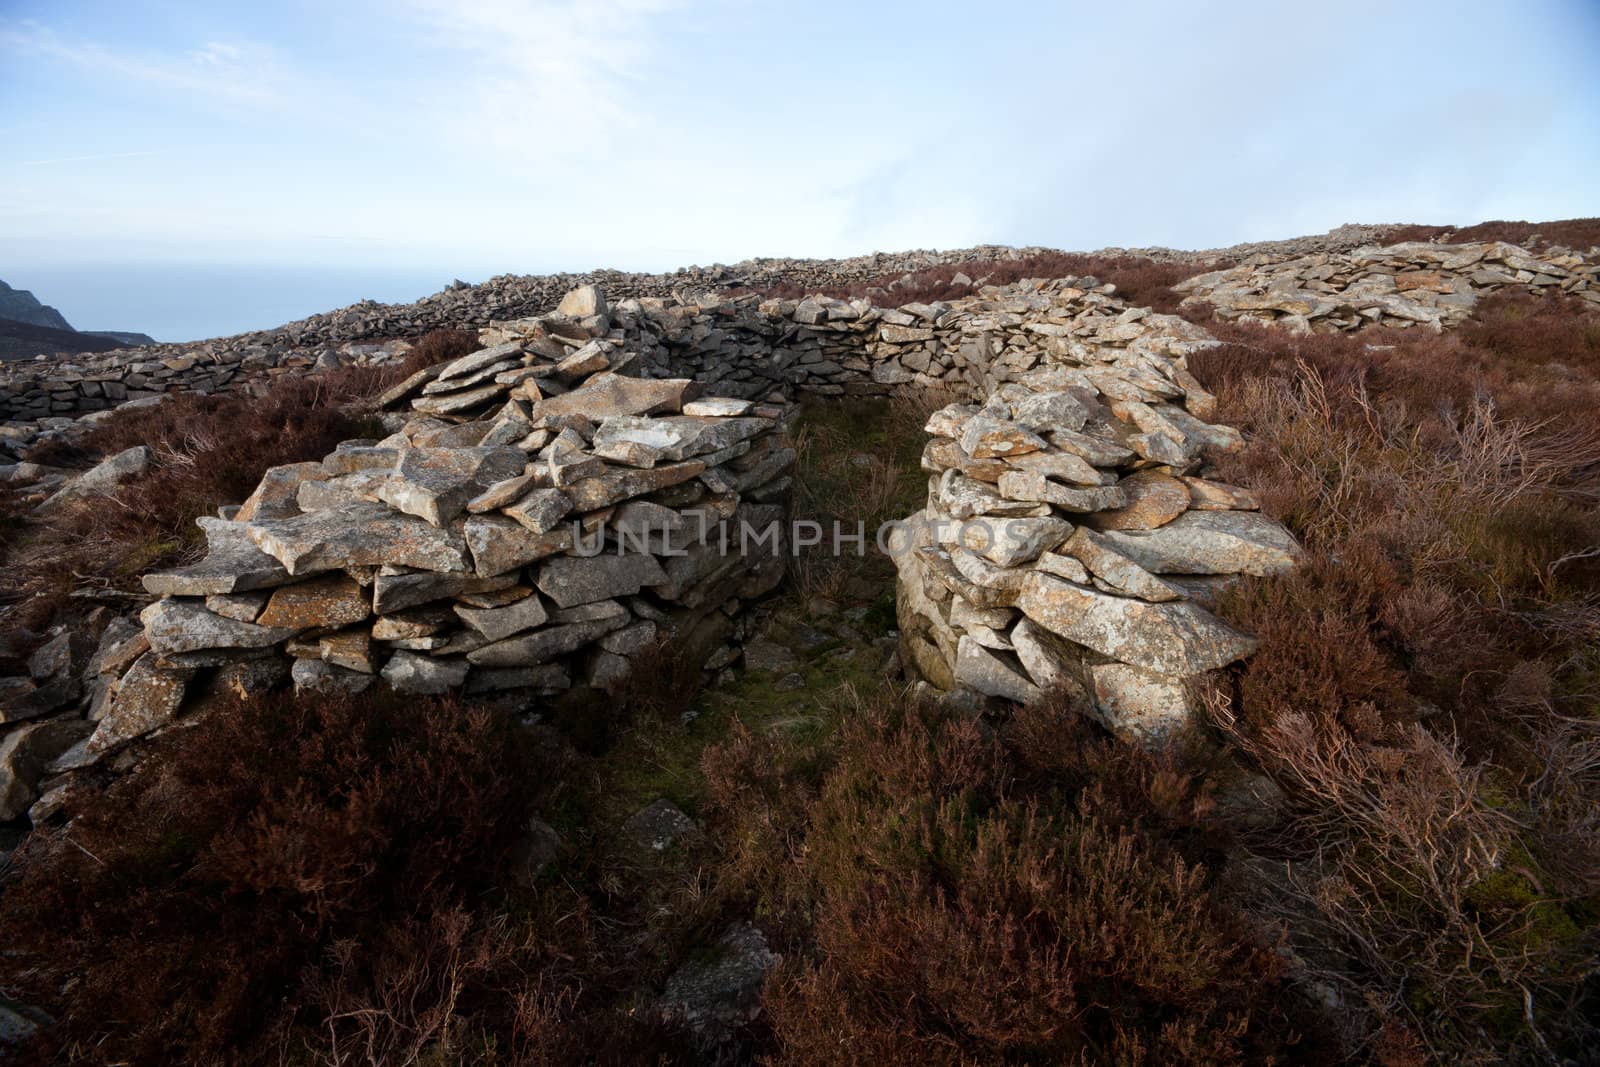 The remains of an iron age building at Tre'r Ceiri hill fort, Yr Eifl, Gwynedd Wales Uk, amongst heather on a hill with the fort wall in the background